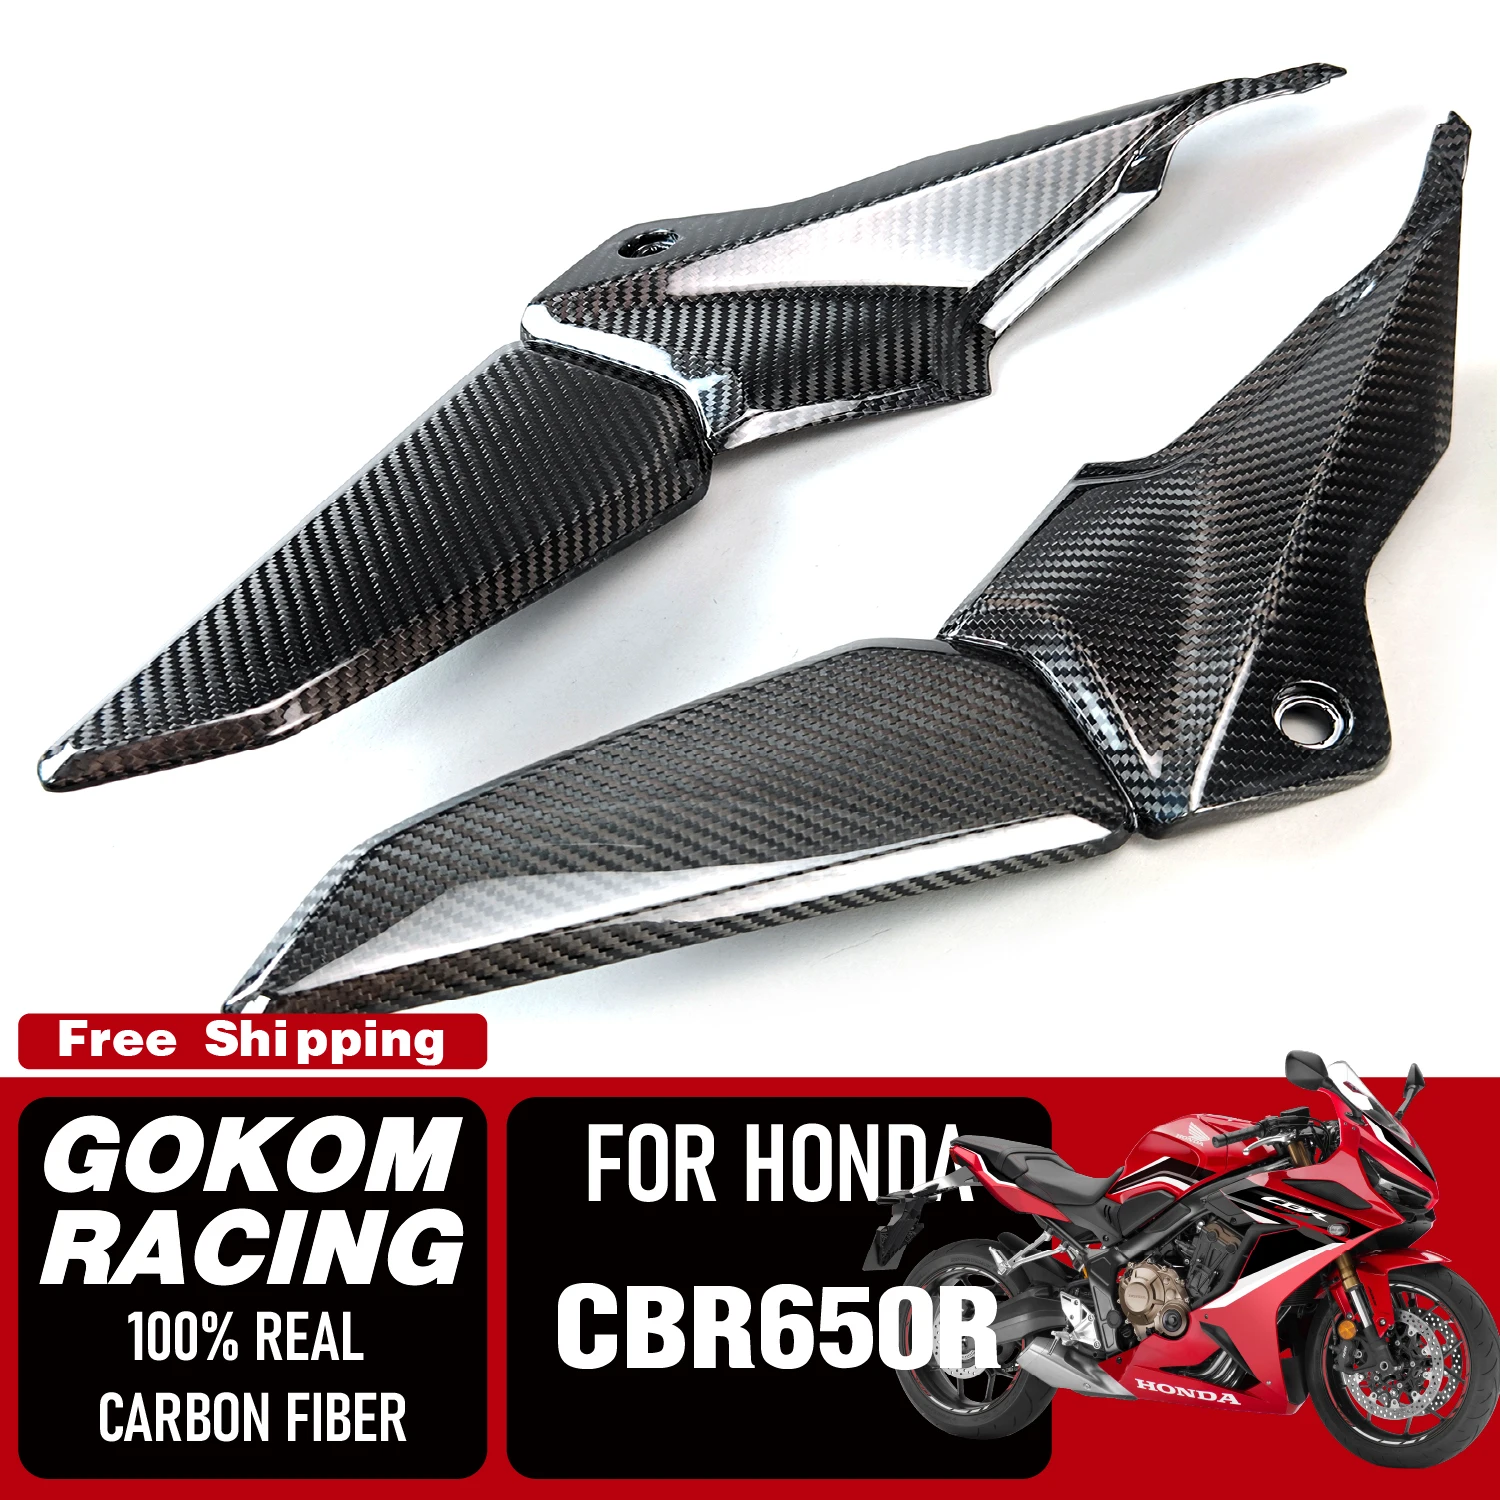 

Gokom Racing For HONDA CBR650R Tank Cover Side Panel GUARD COVER COWLING FAIRING 100% REAL CARBON FIBER MOTORCYCLE ACCESSORIES